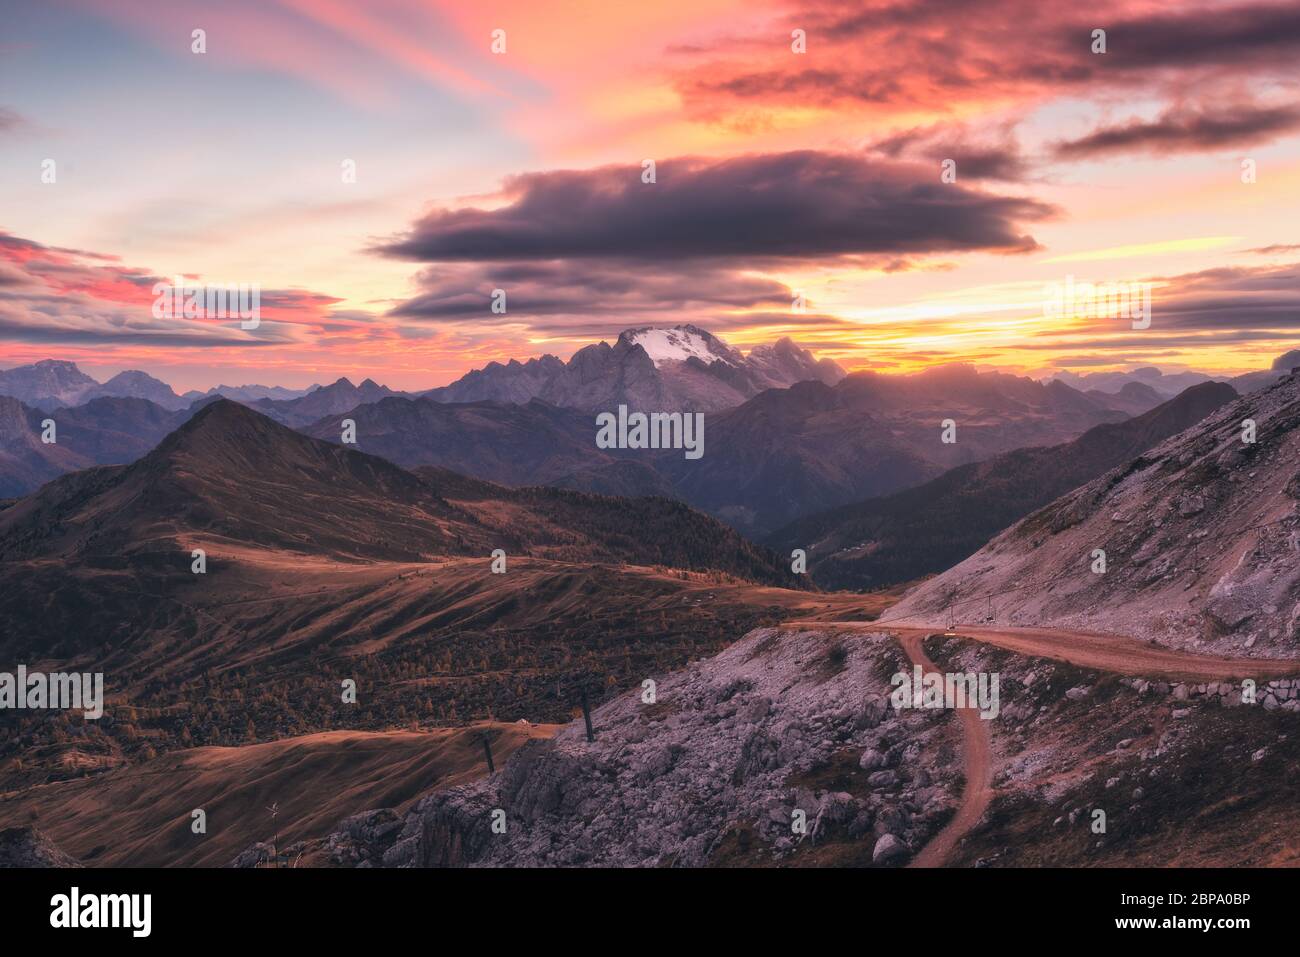 Mountains at beautiful sunset in autumn in Dolomites, Italy Stock Photo